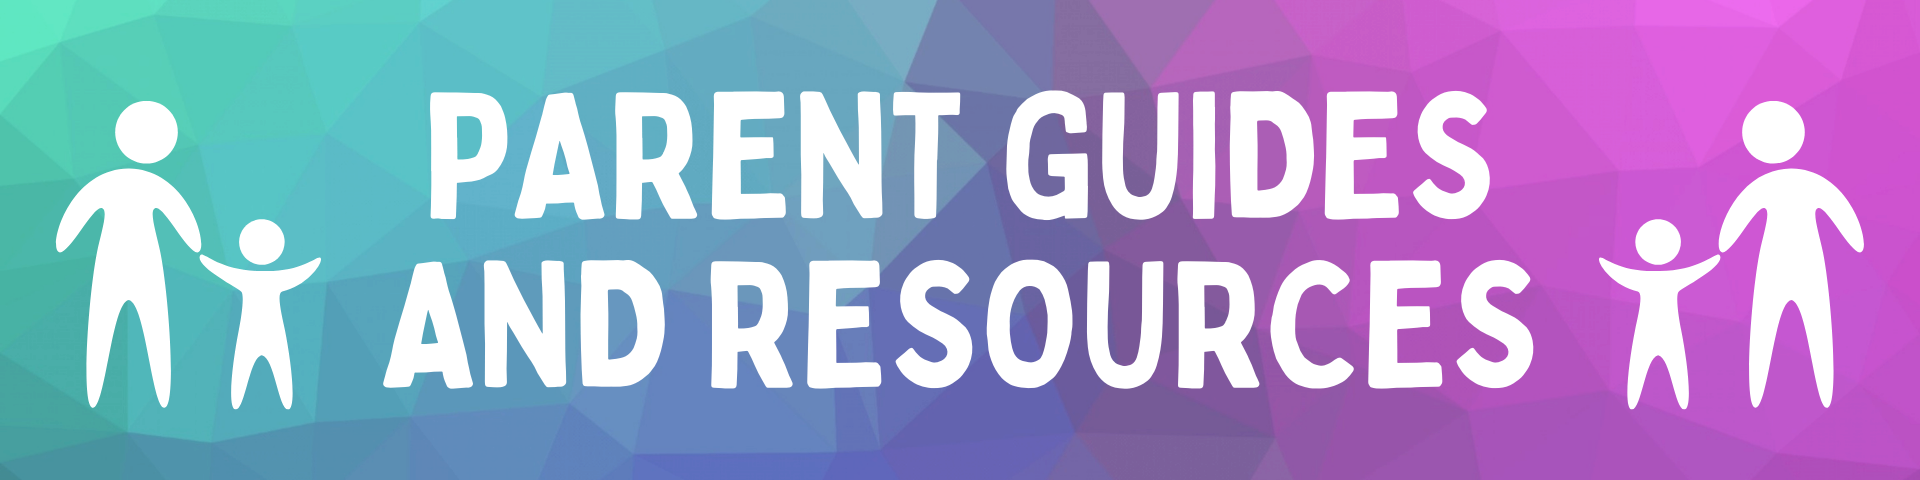 Parent Guides and Resources